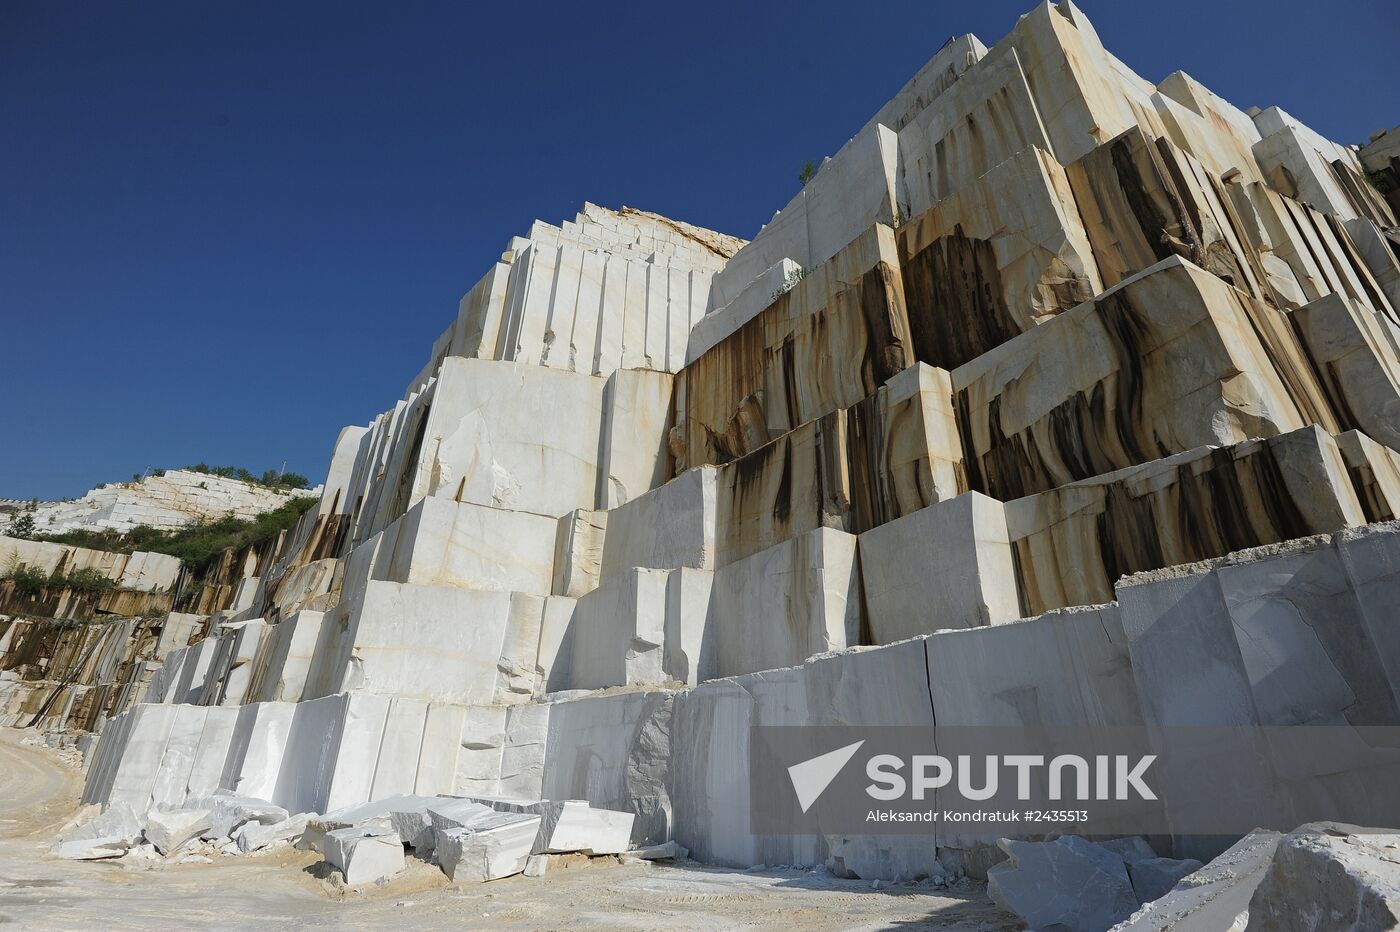 Production and processing of white marble in the Chelyabinsk Region